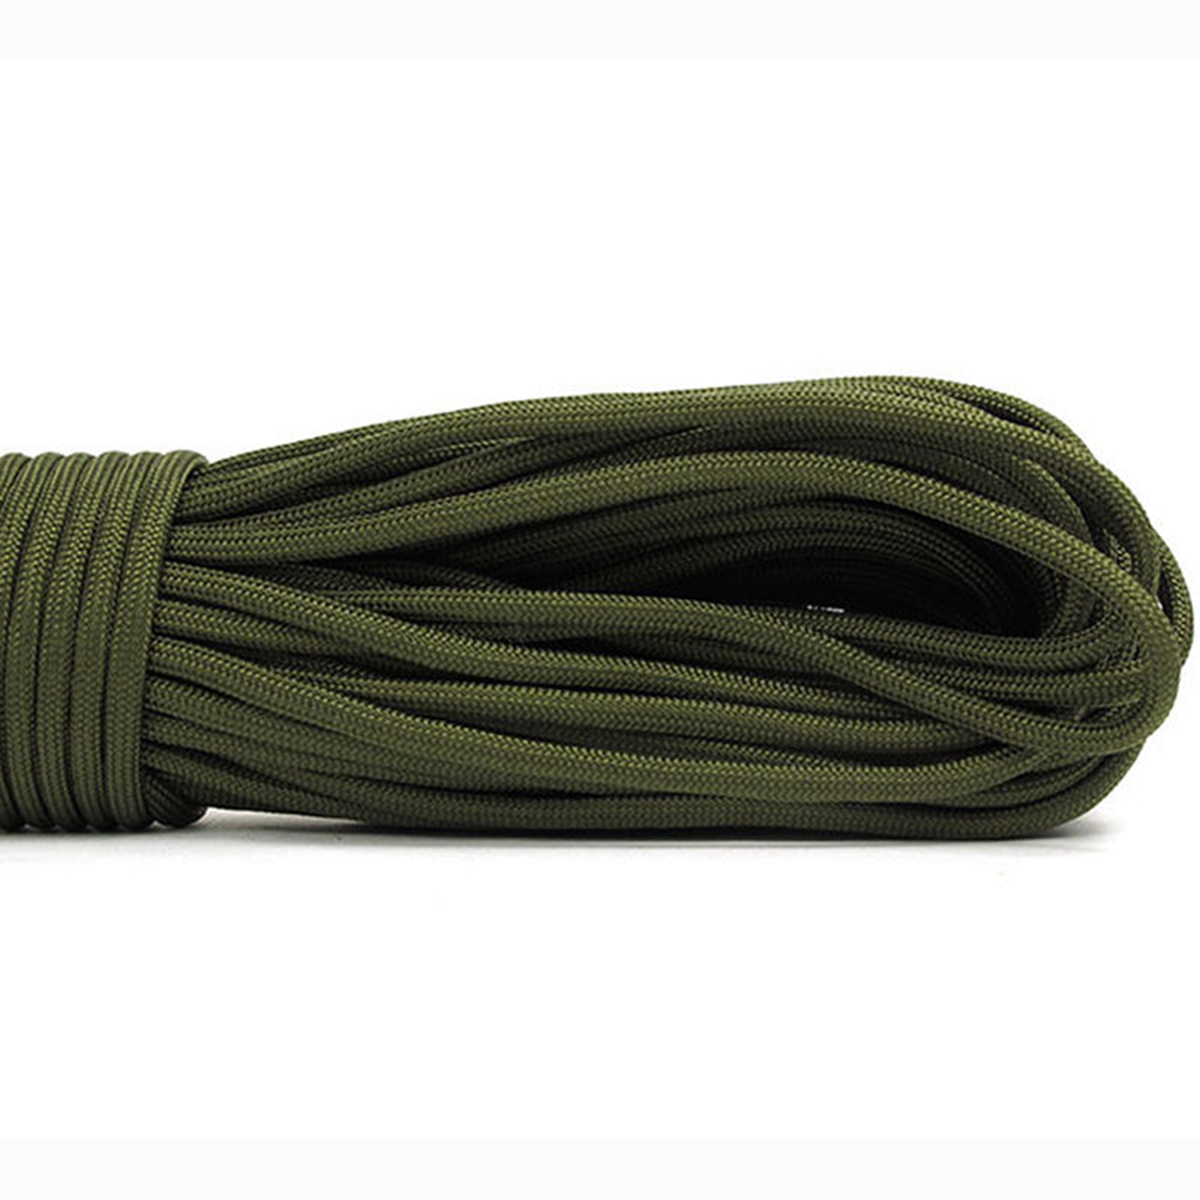 100FT30M-550lb-Paracord-Parachute-Lanyard-7-Strand-Core-Emergency-Army-Green-Rope-1222900-6